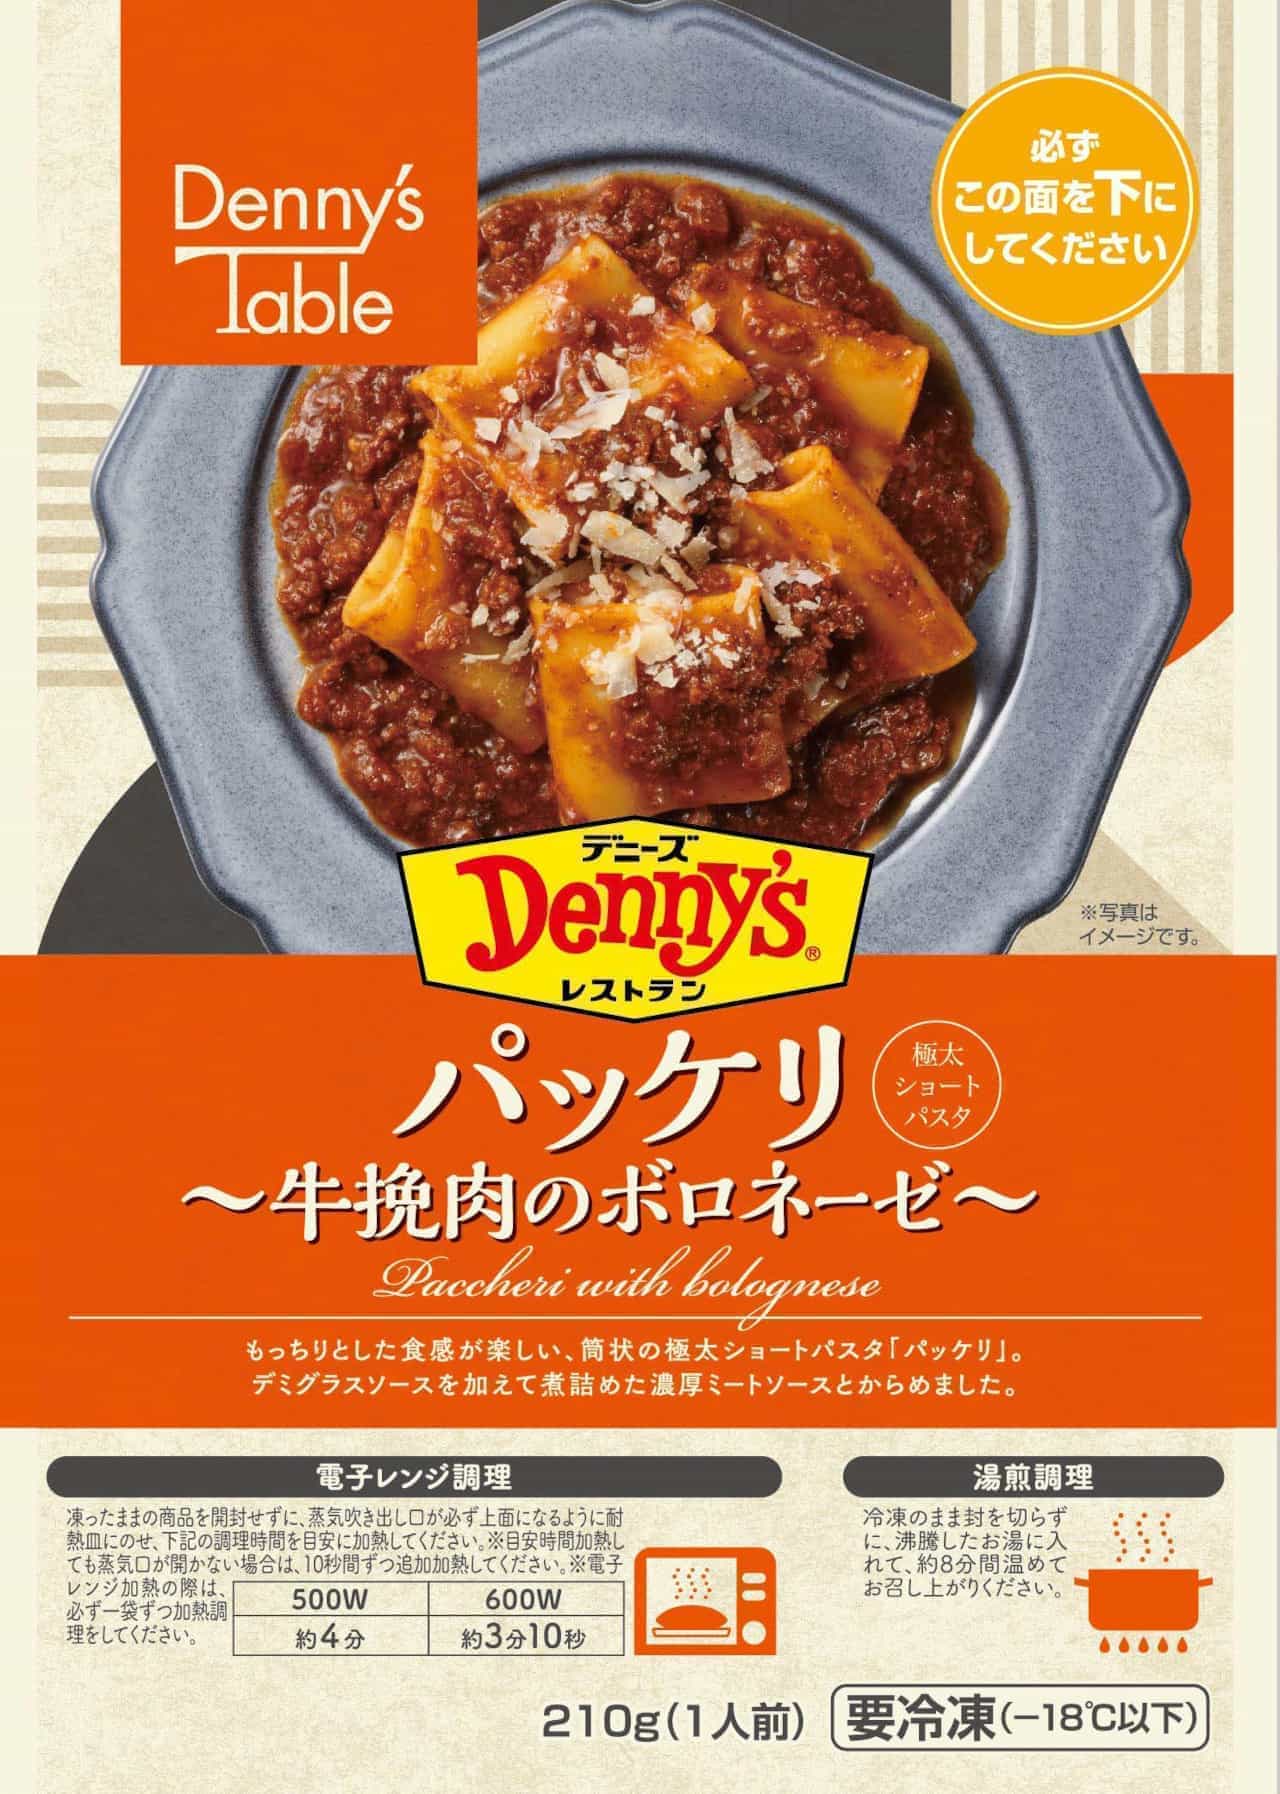 Denny's "Paccheri - Ground Beef Bolognese